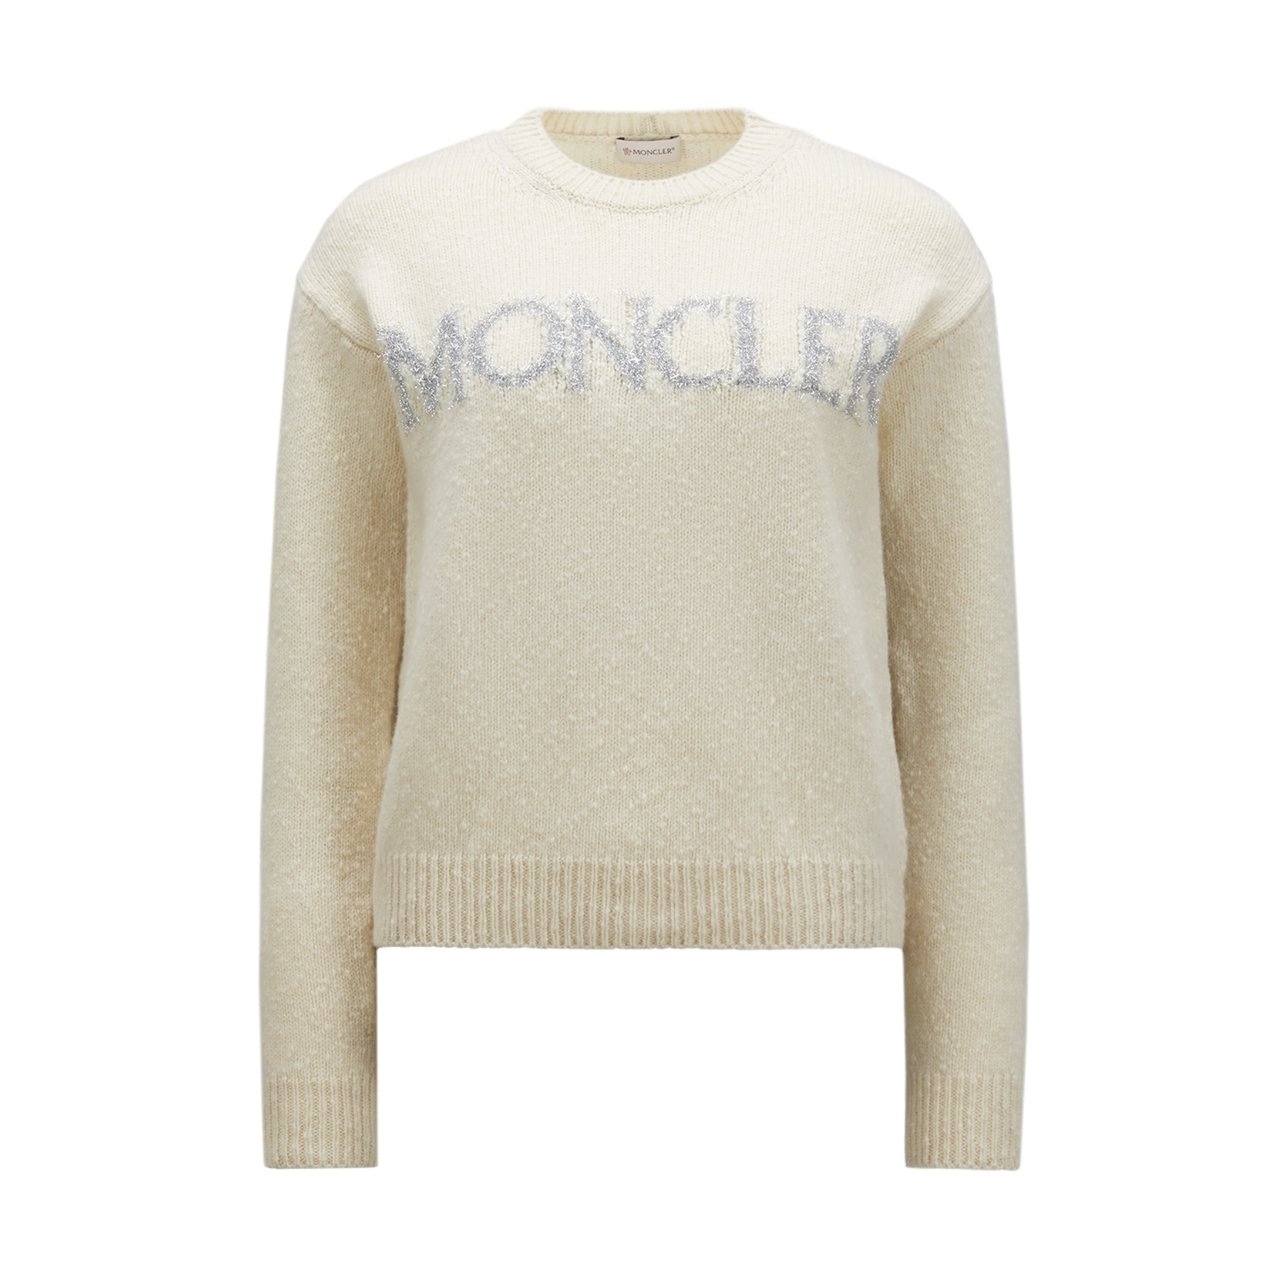 Moncler white wool and cashmere sweater with Moncler in silver